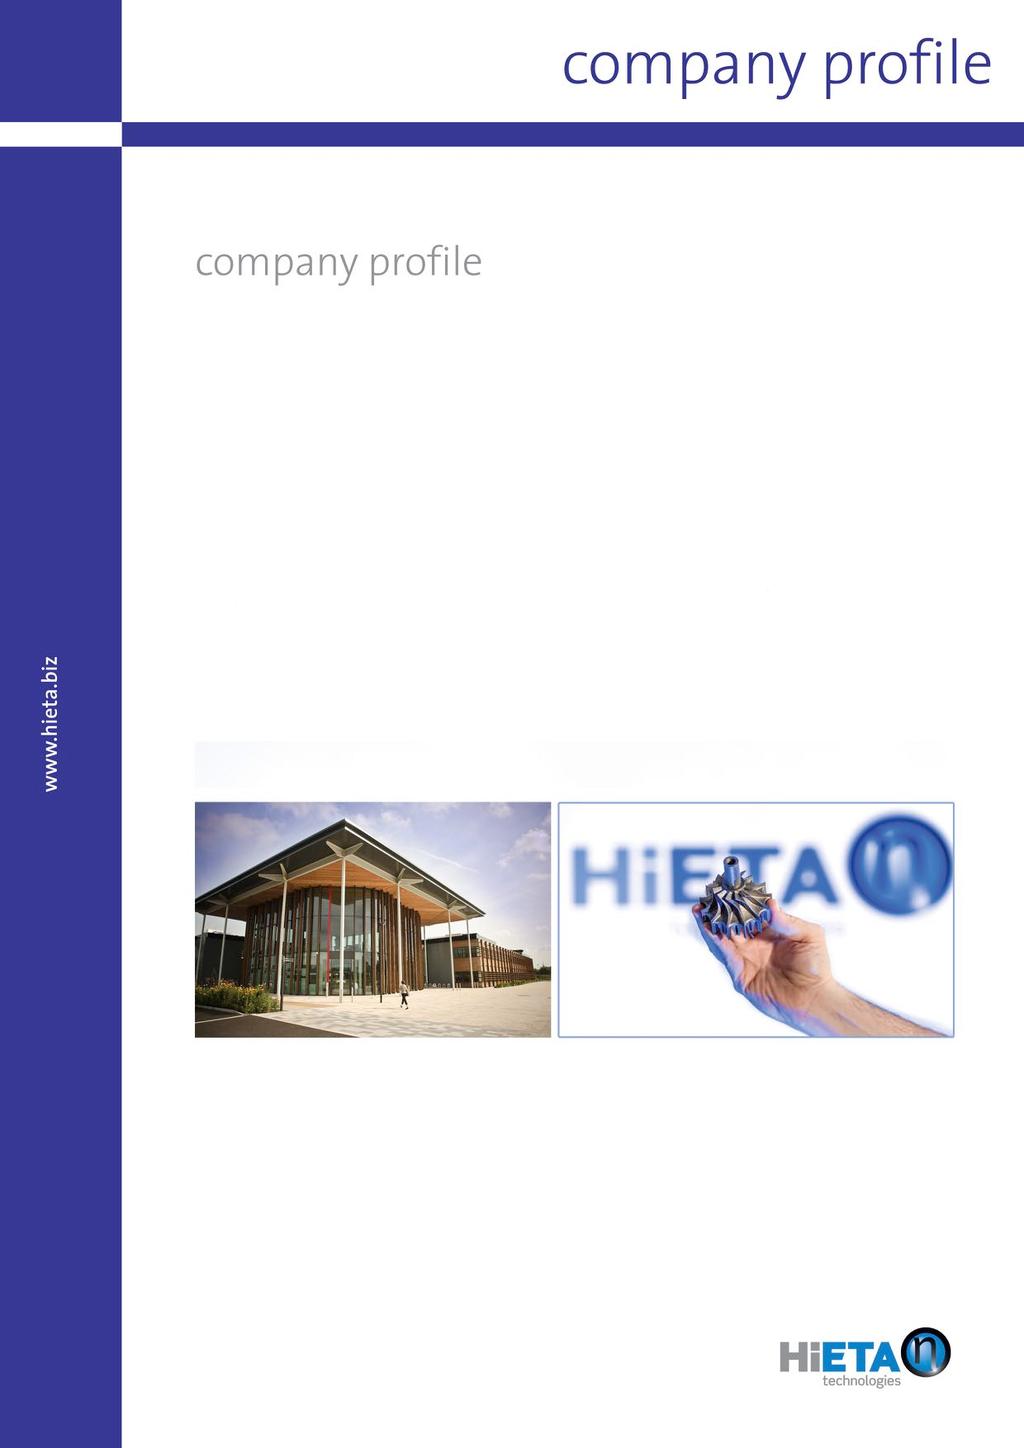 company profile HiETA Technologies Limited is a product design, development and production company exploiting the new technology of Additive Manufacturing (AM).